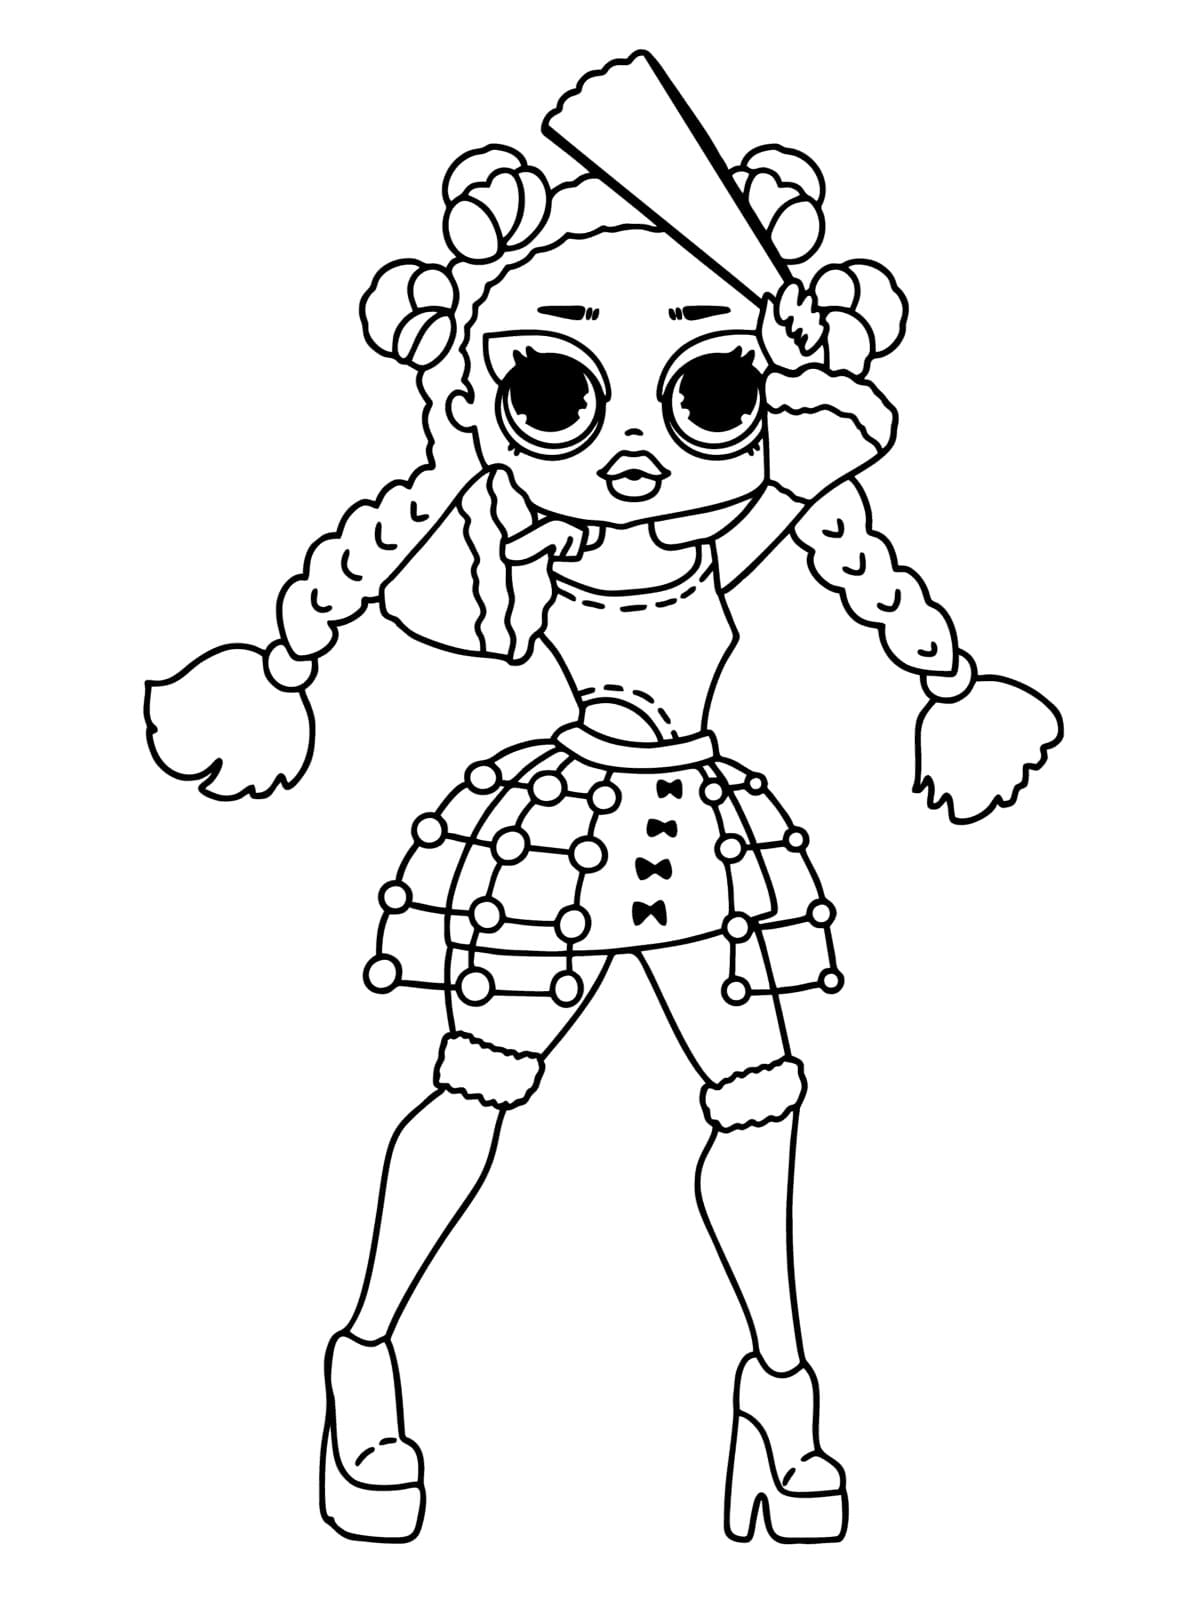 Miss Royale LOL OMG coloring page